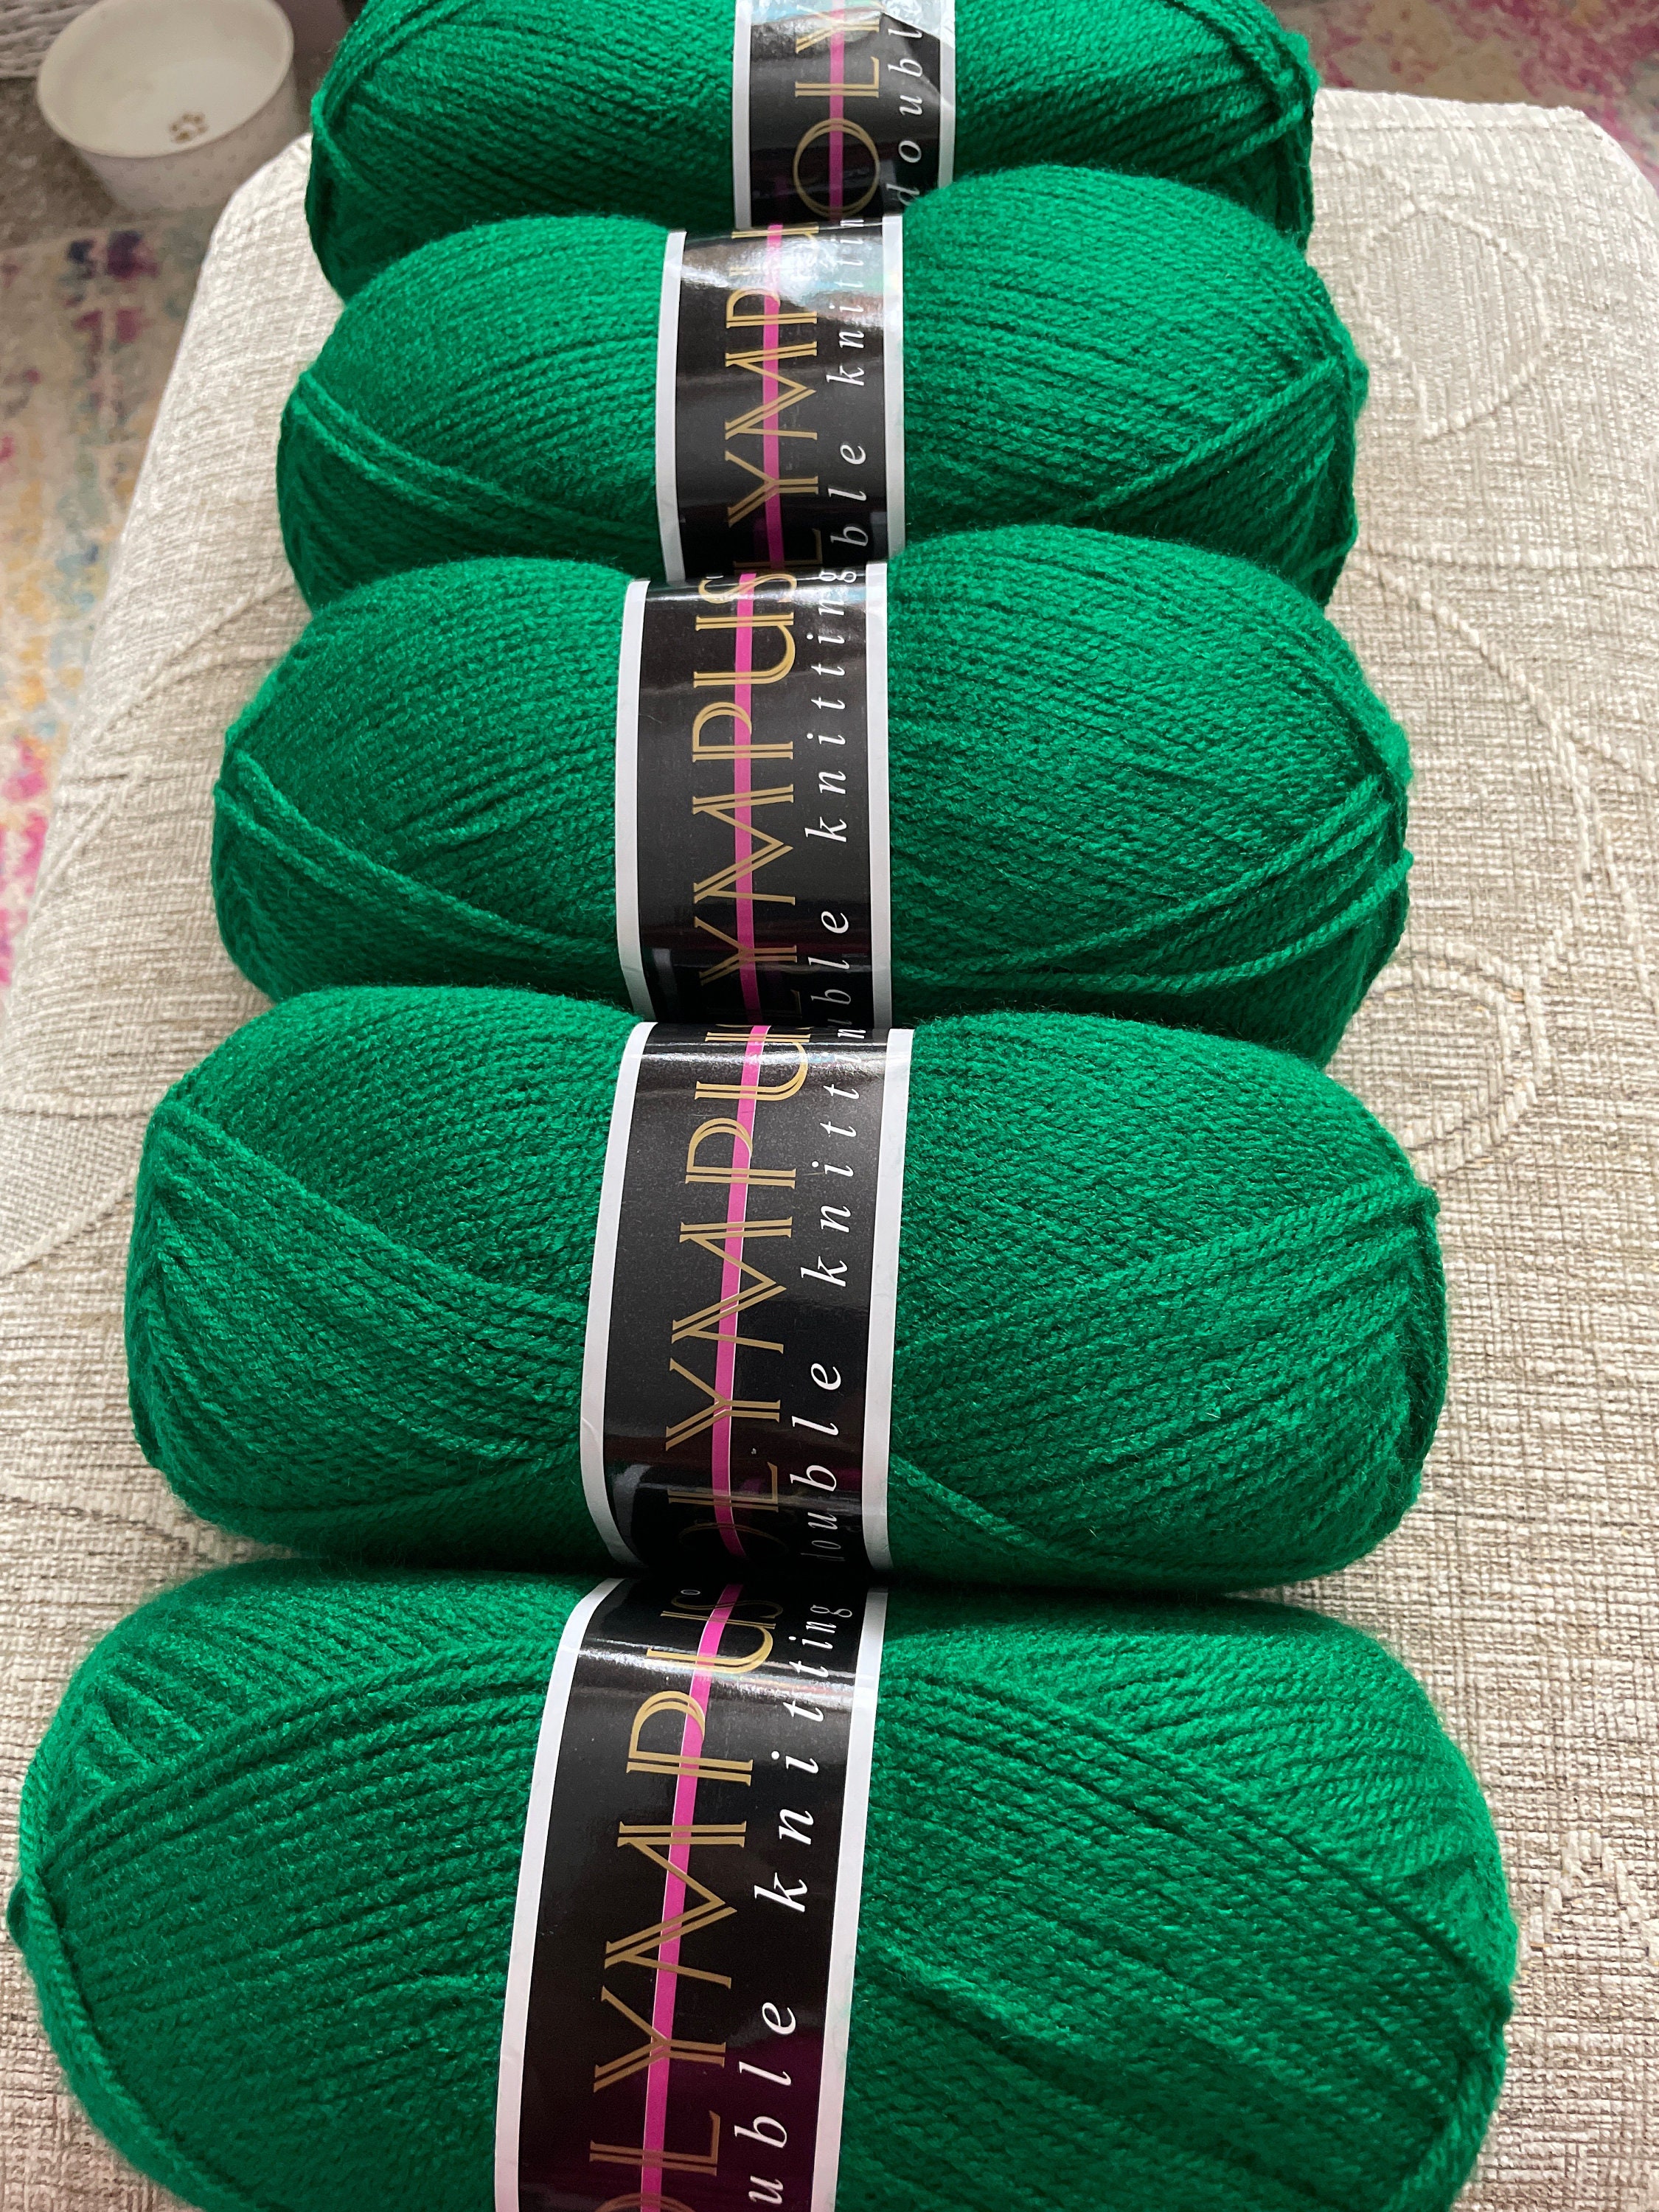 Moss Green Soft Merino Wool Yarn 440m/100g for Hand or Machine Knitting,  Crocheting, for Children and Adults Clothes, Weave Blankets 